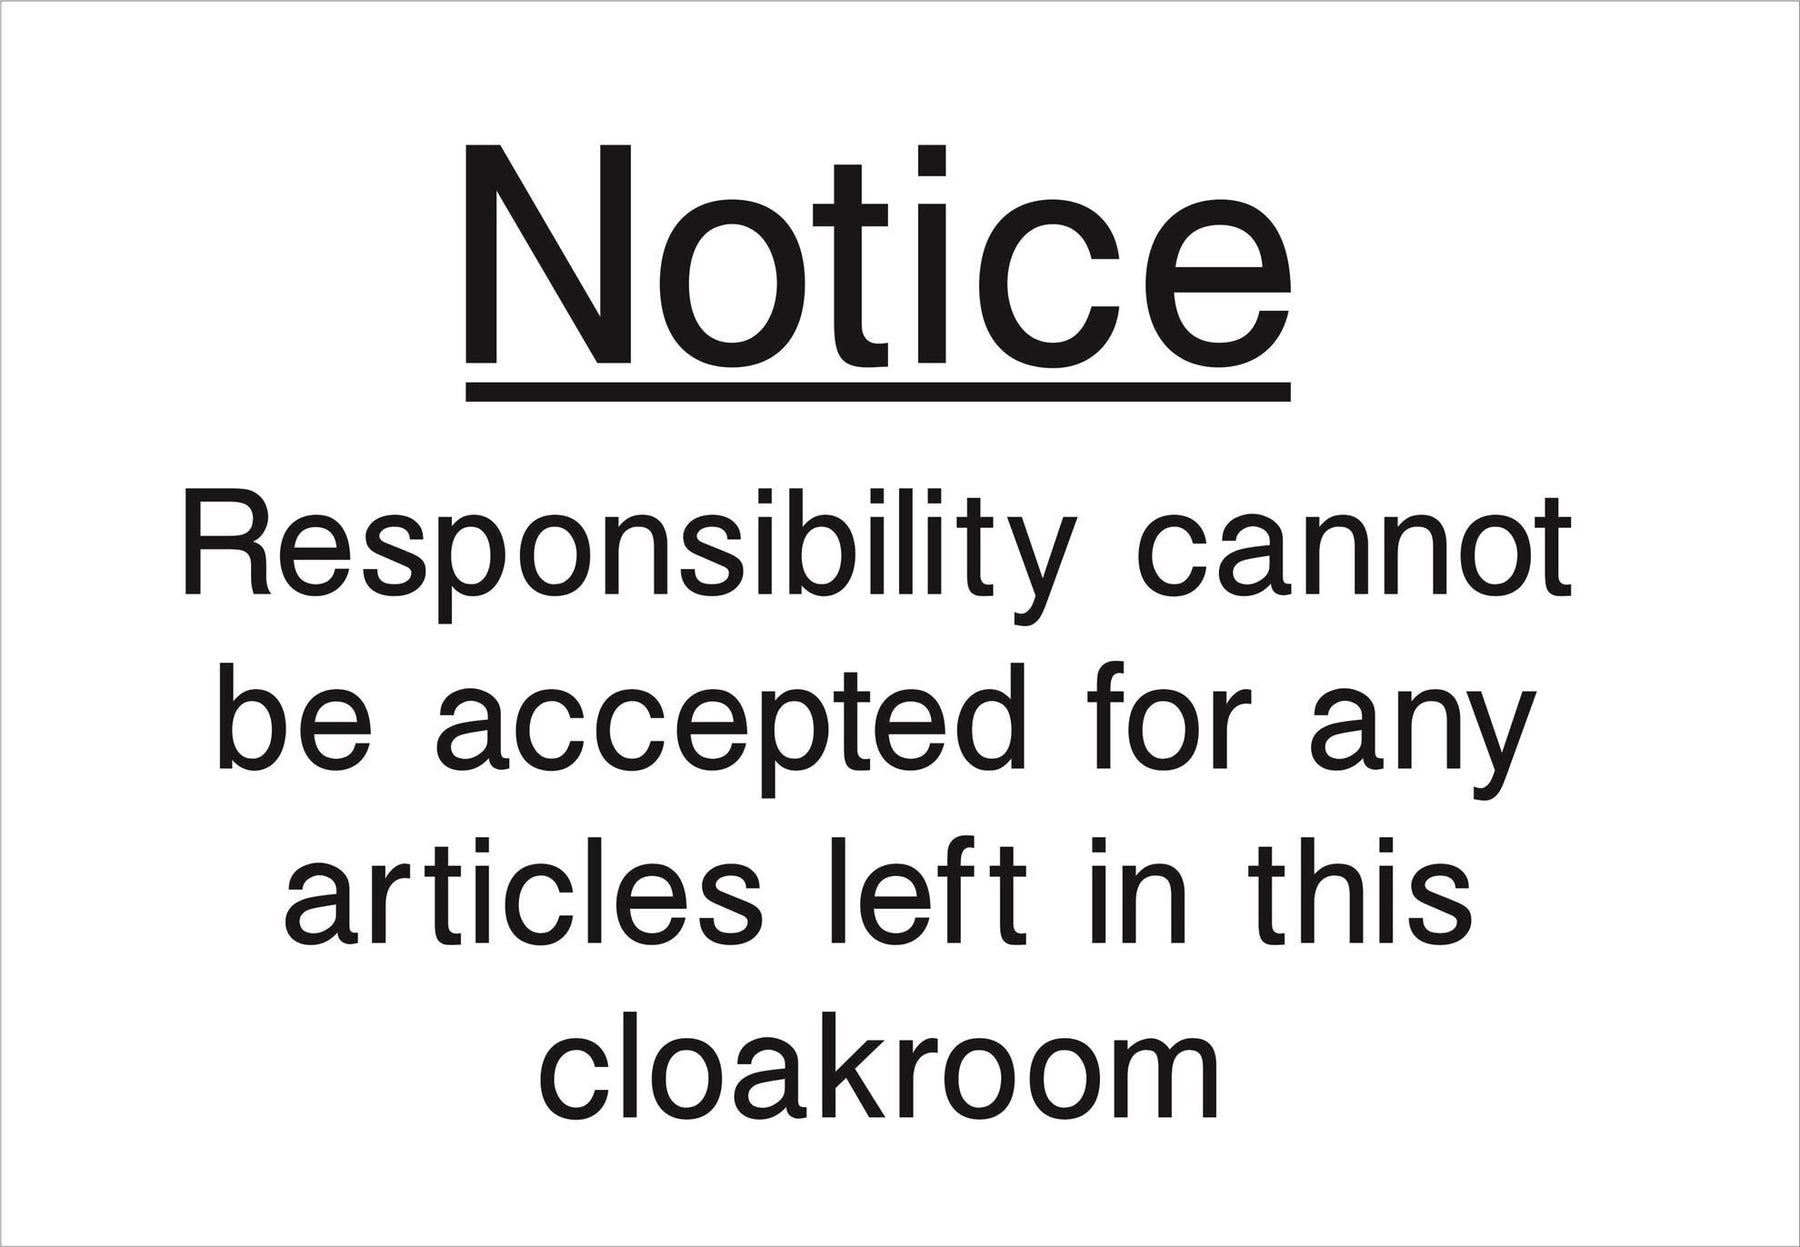 Notice Responsibility cannot be accepted for any articles left in this cloakroom